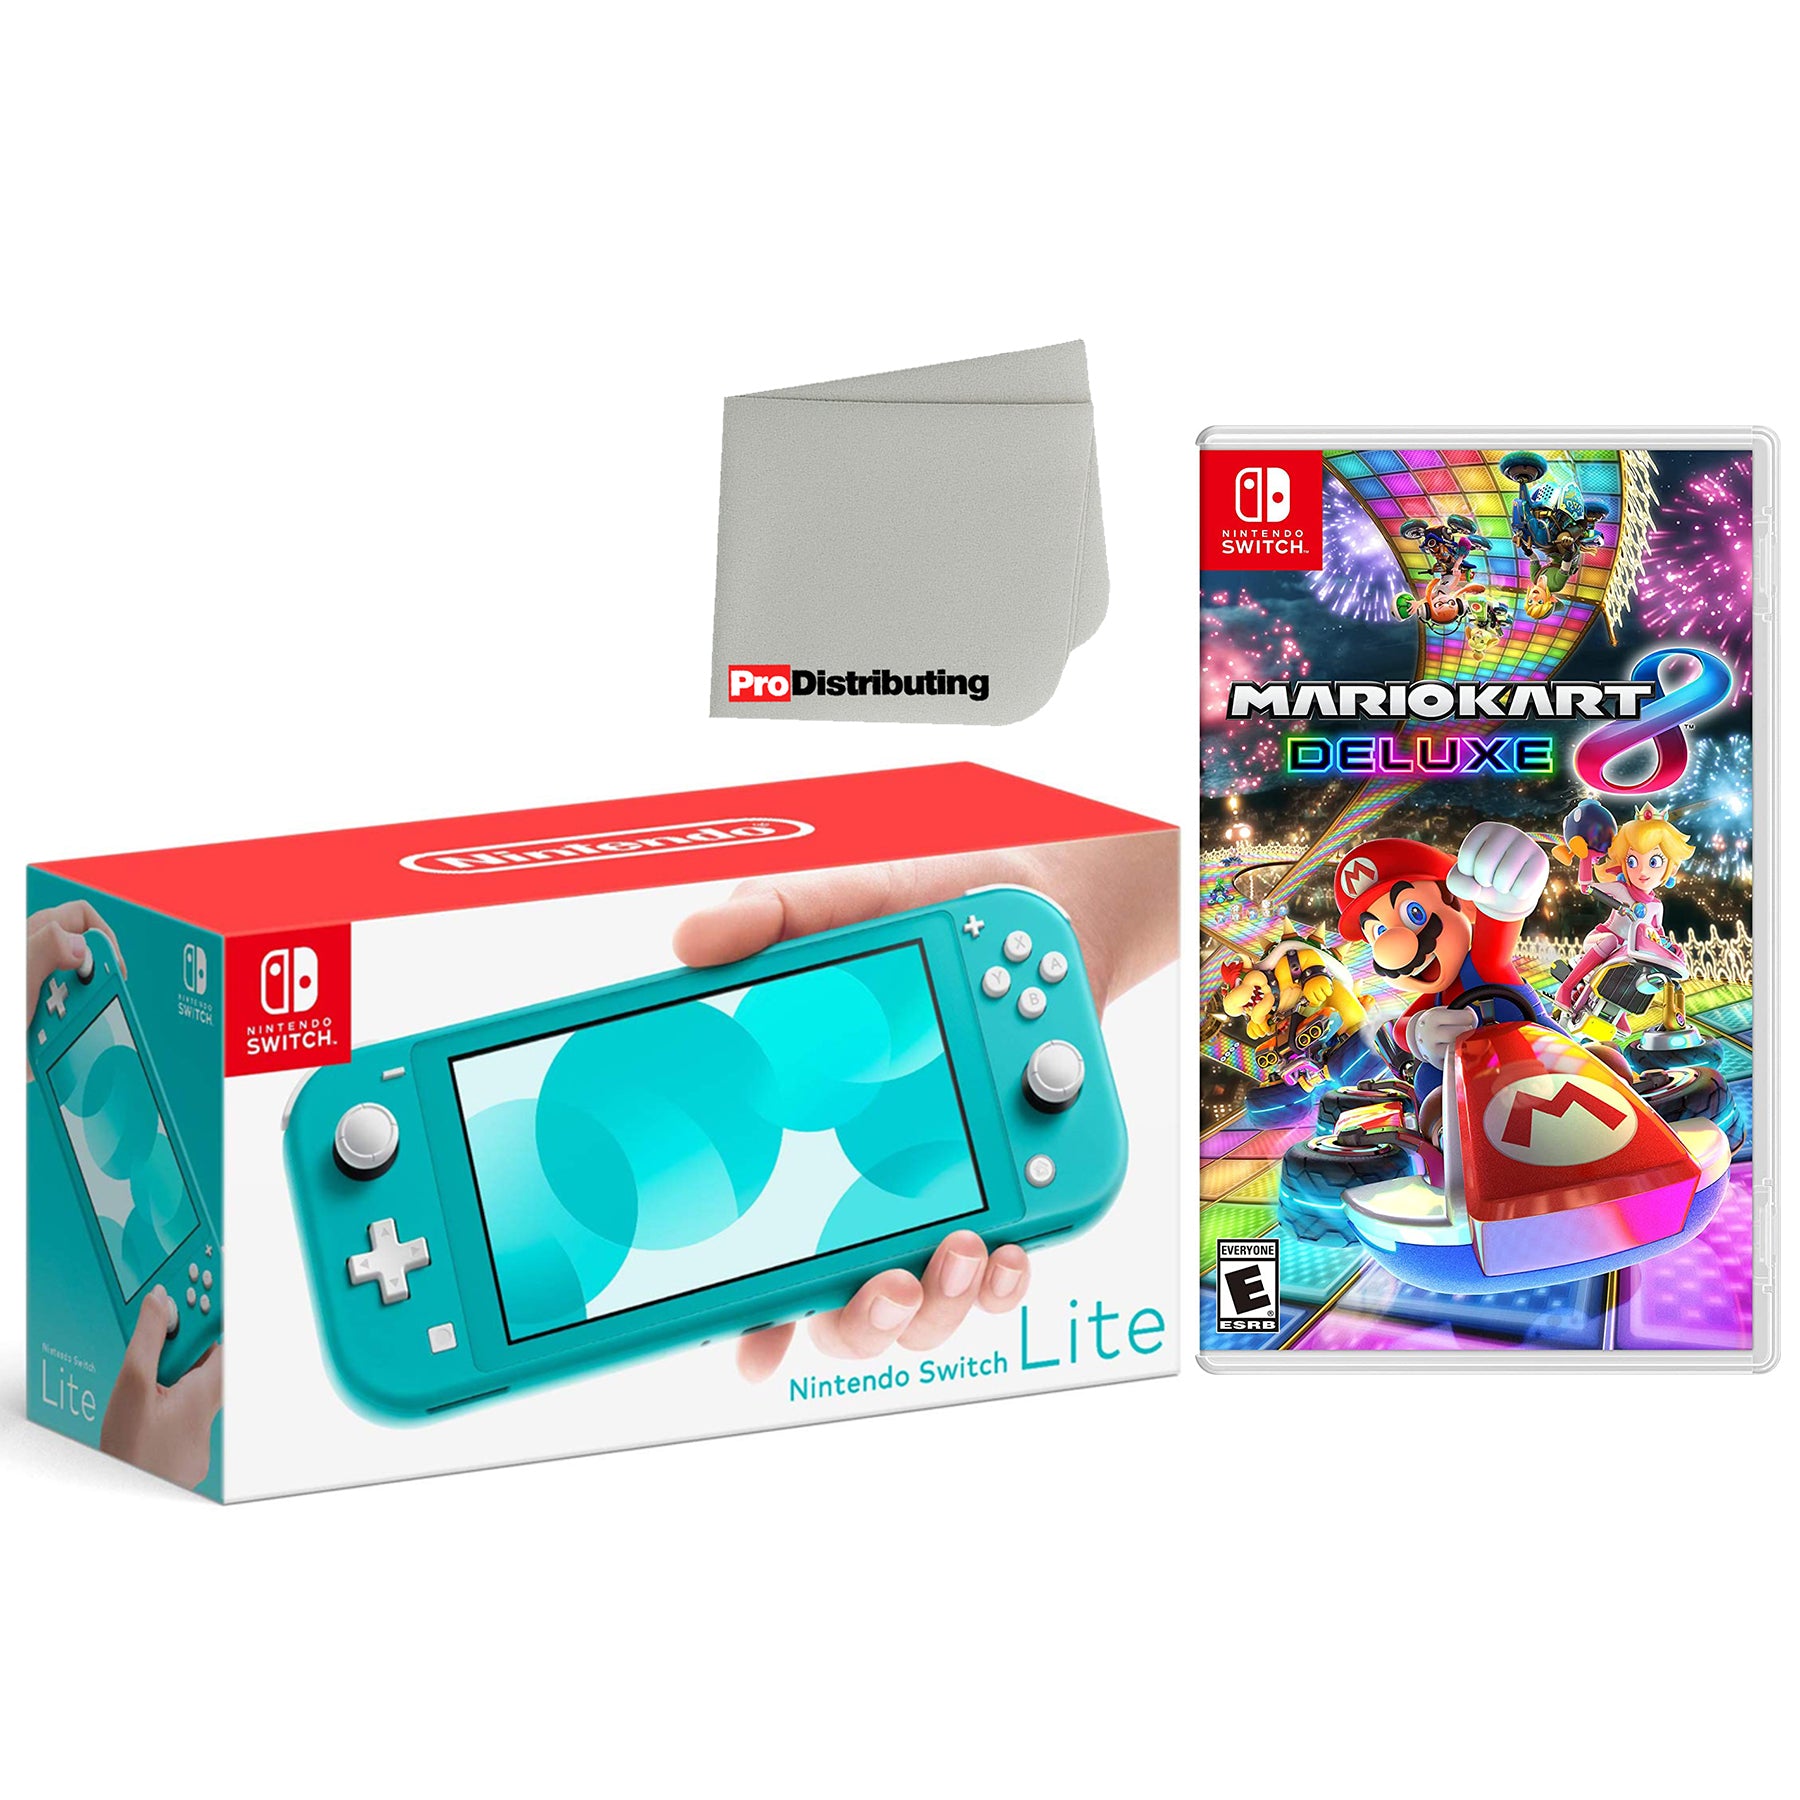 Nintendo Switch Lite 32GB Handheld Video Game Console in Turquoise with Mario Kart 8 Deluxe Game Bundle - Pro-Distributing